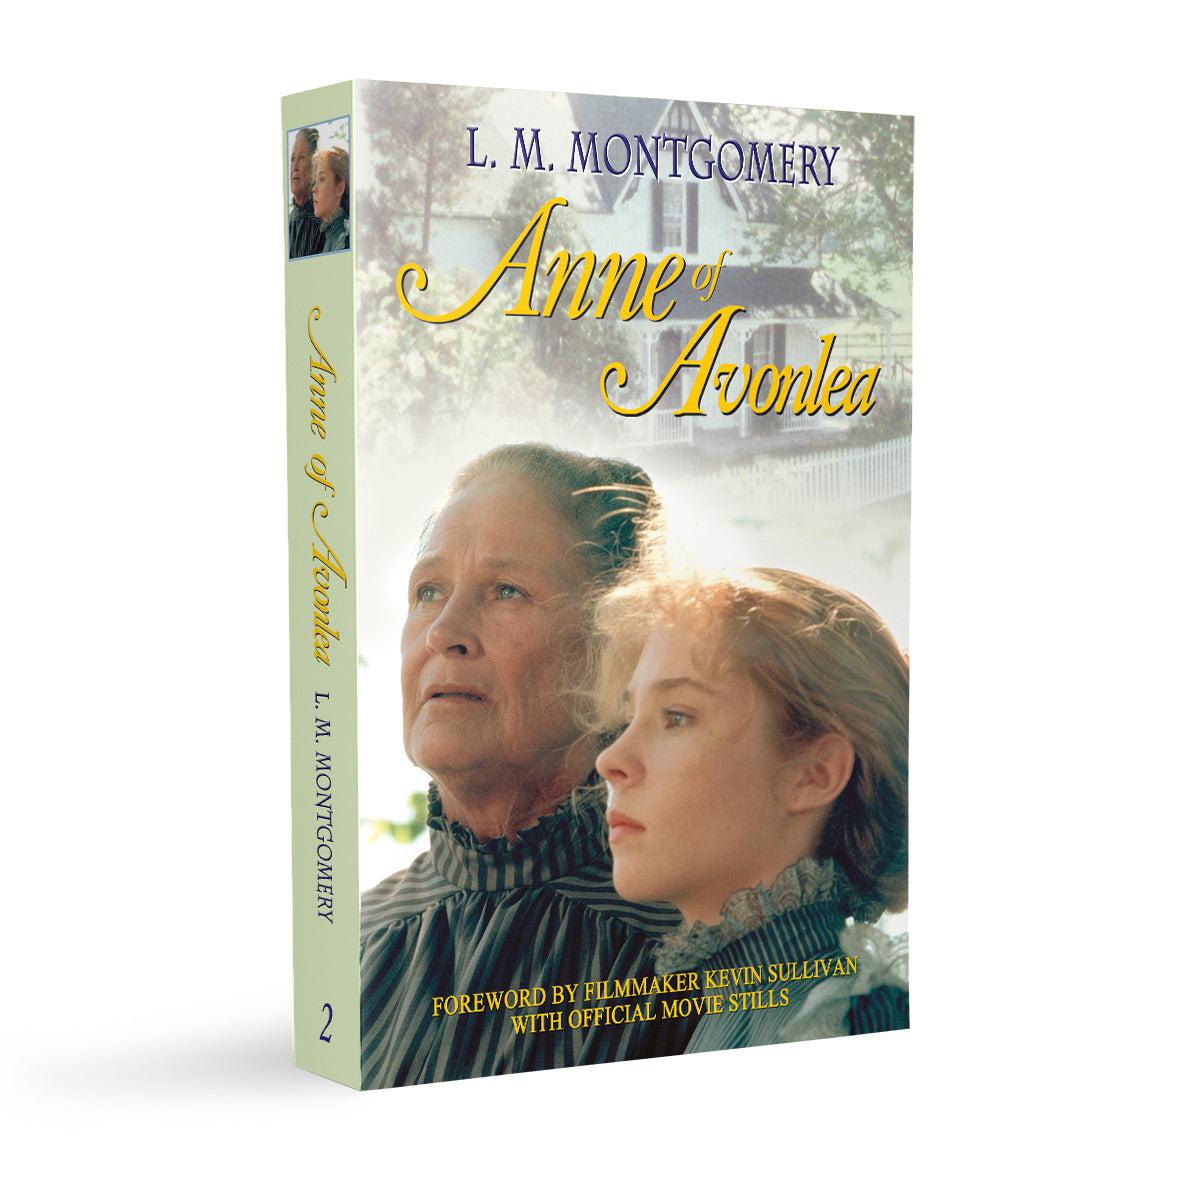 Two Pack of "Anne of Green Gables" Novels By L.M. Montgomery